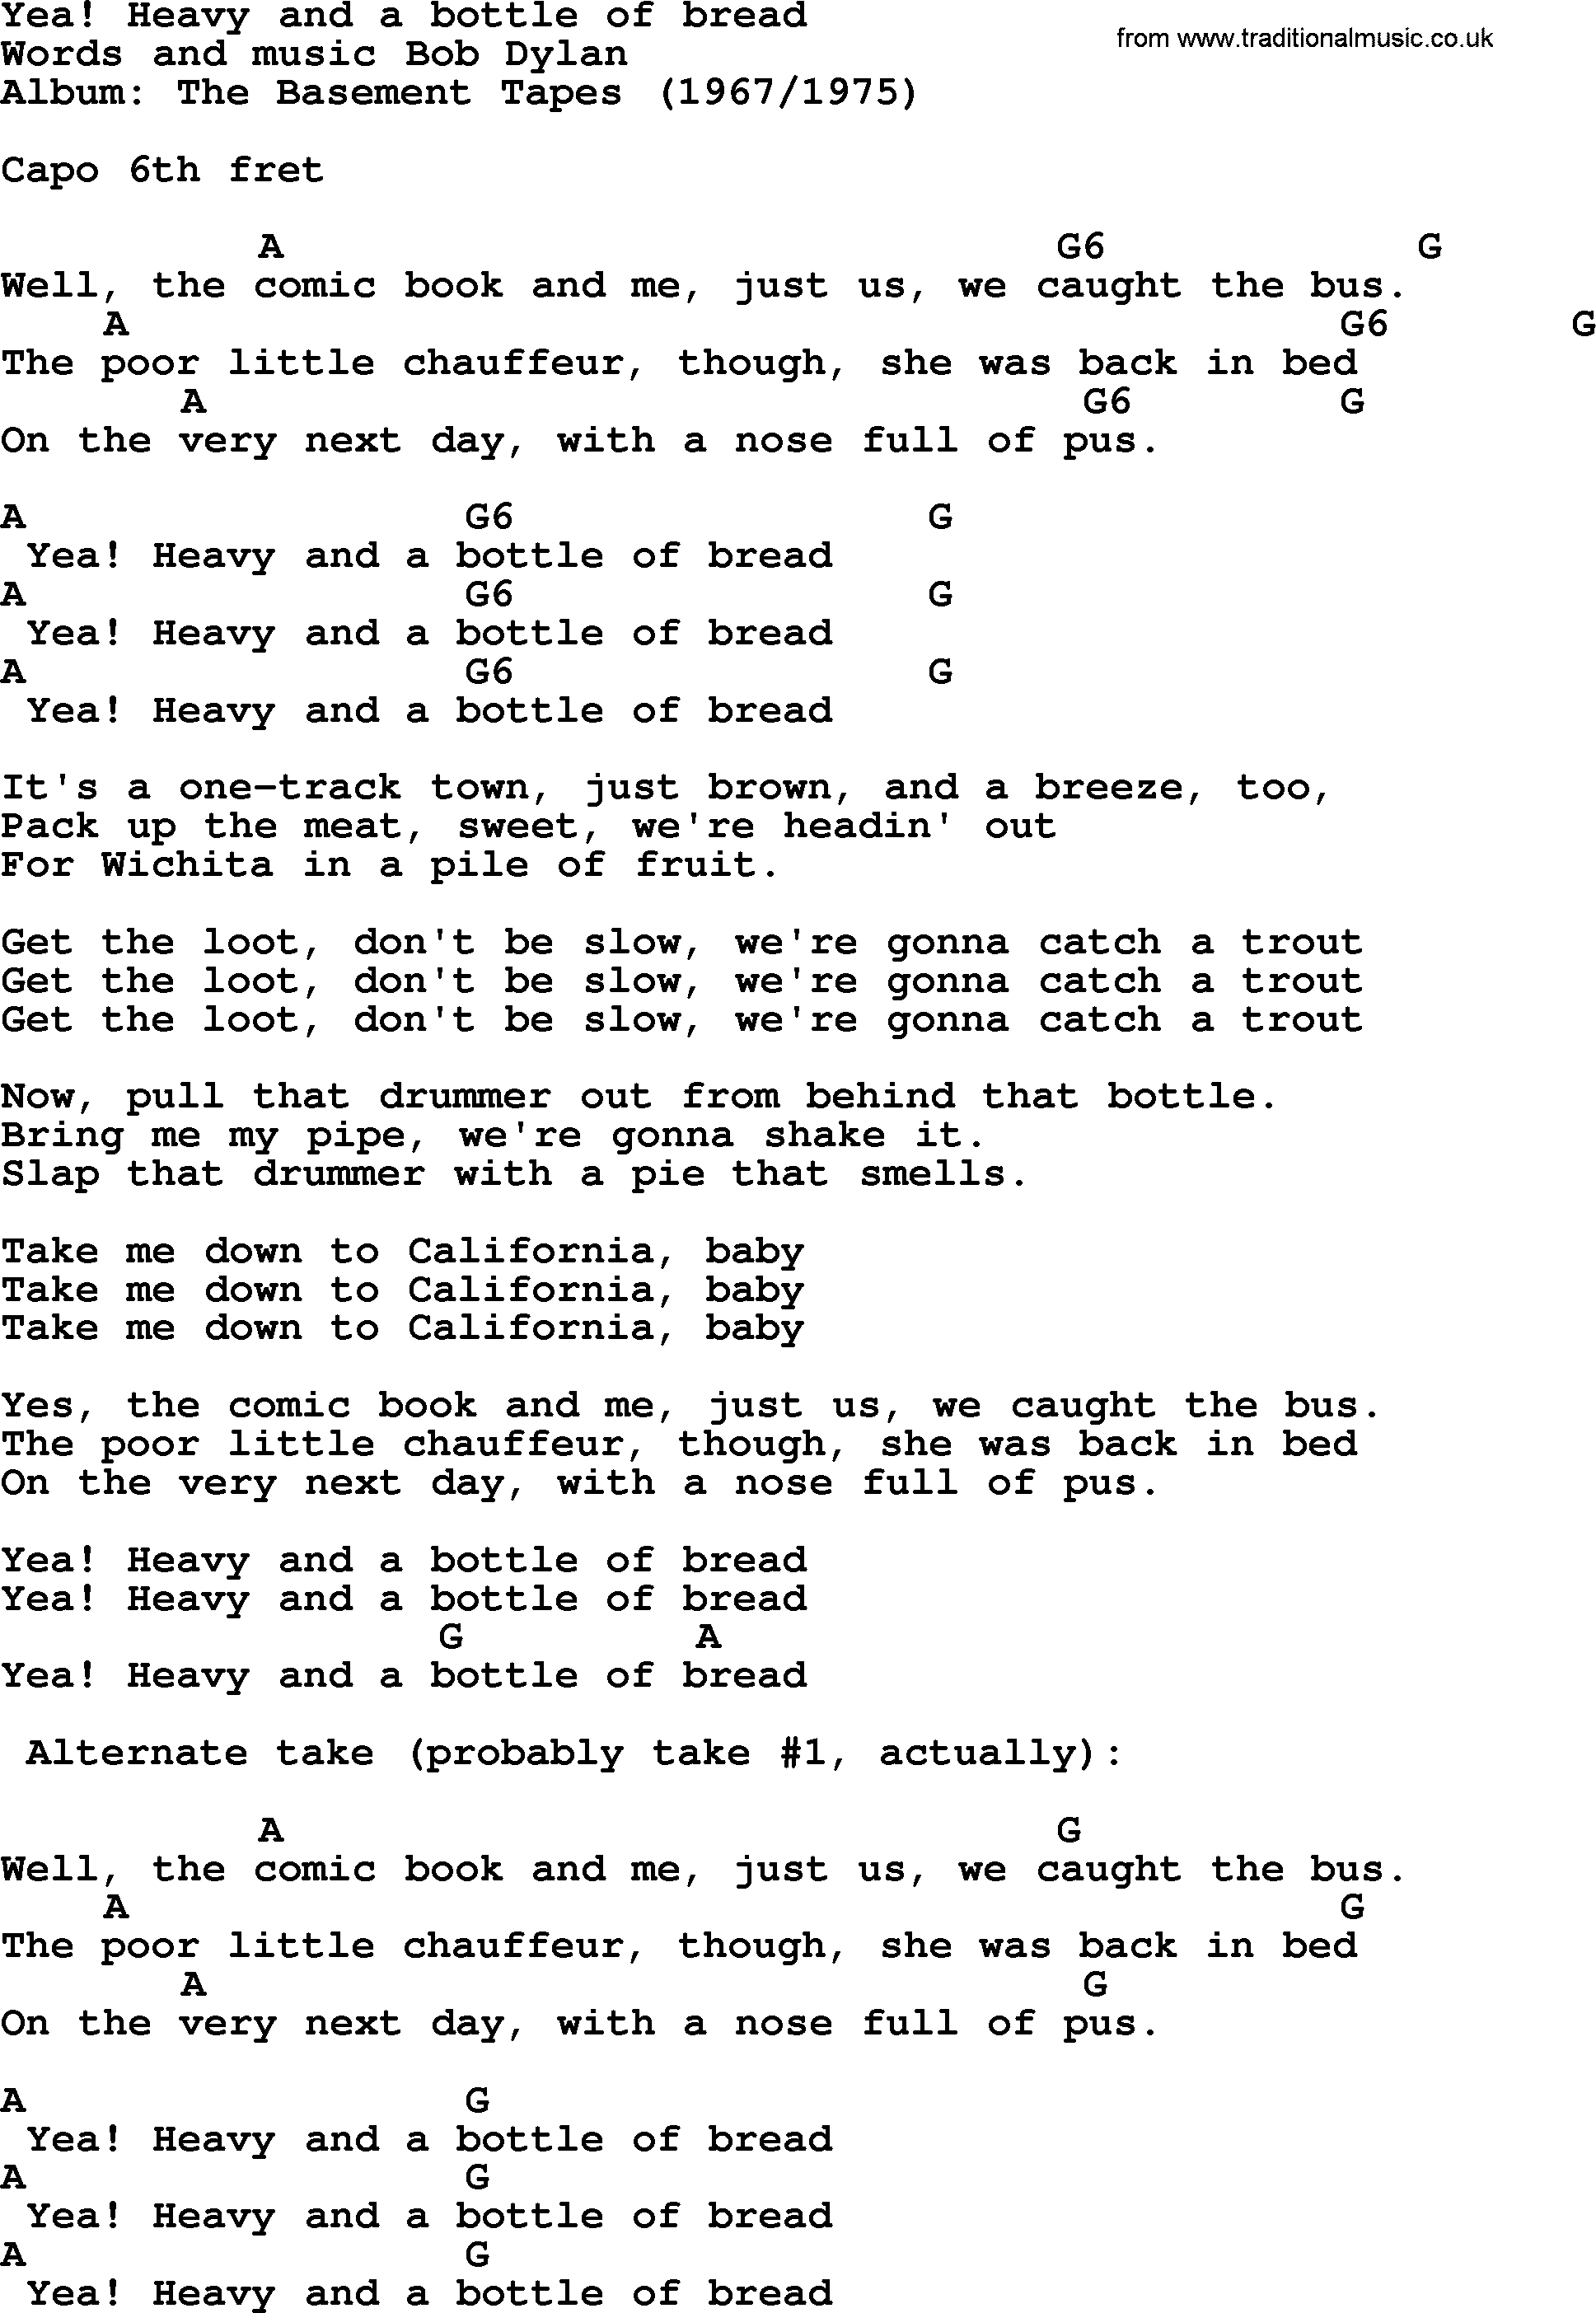 Bob Dylan song, lyrics with chords - Yea! Heavy and a bottle of bread